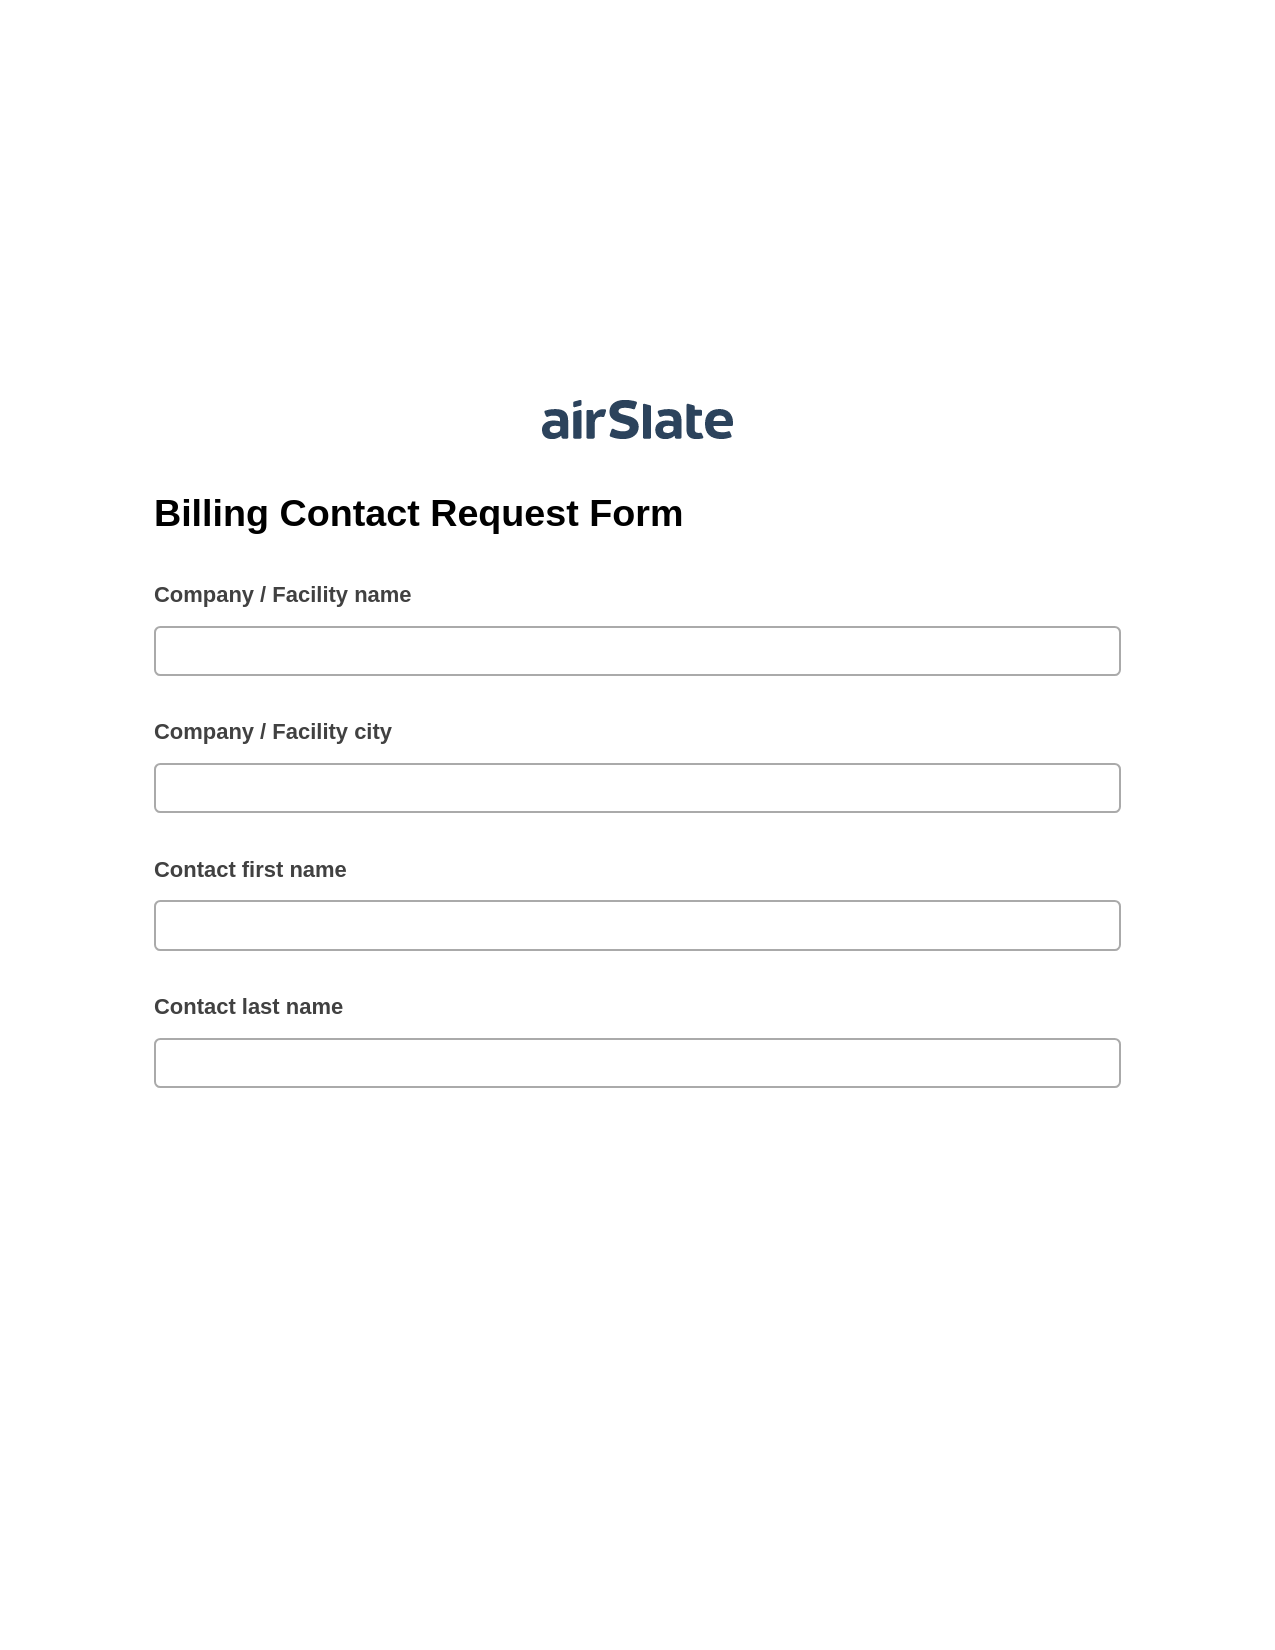 Multirole Billing Contact Request Form Pre-fill from CSV File Bot, Reminder Bot, Slack Notification Postfinish Bot